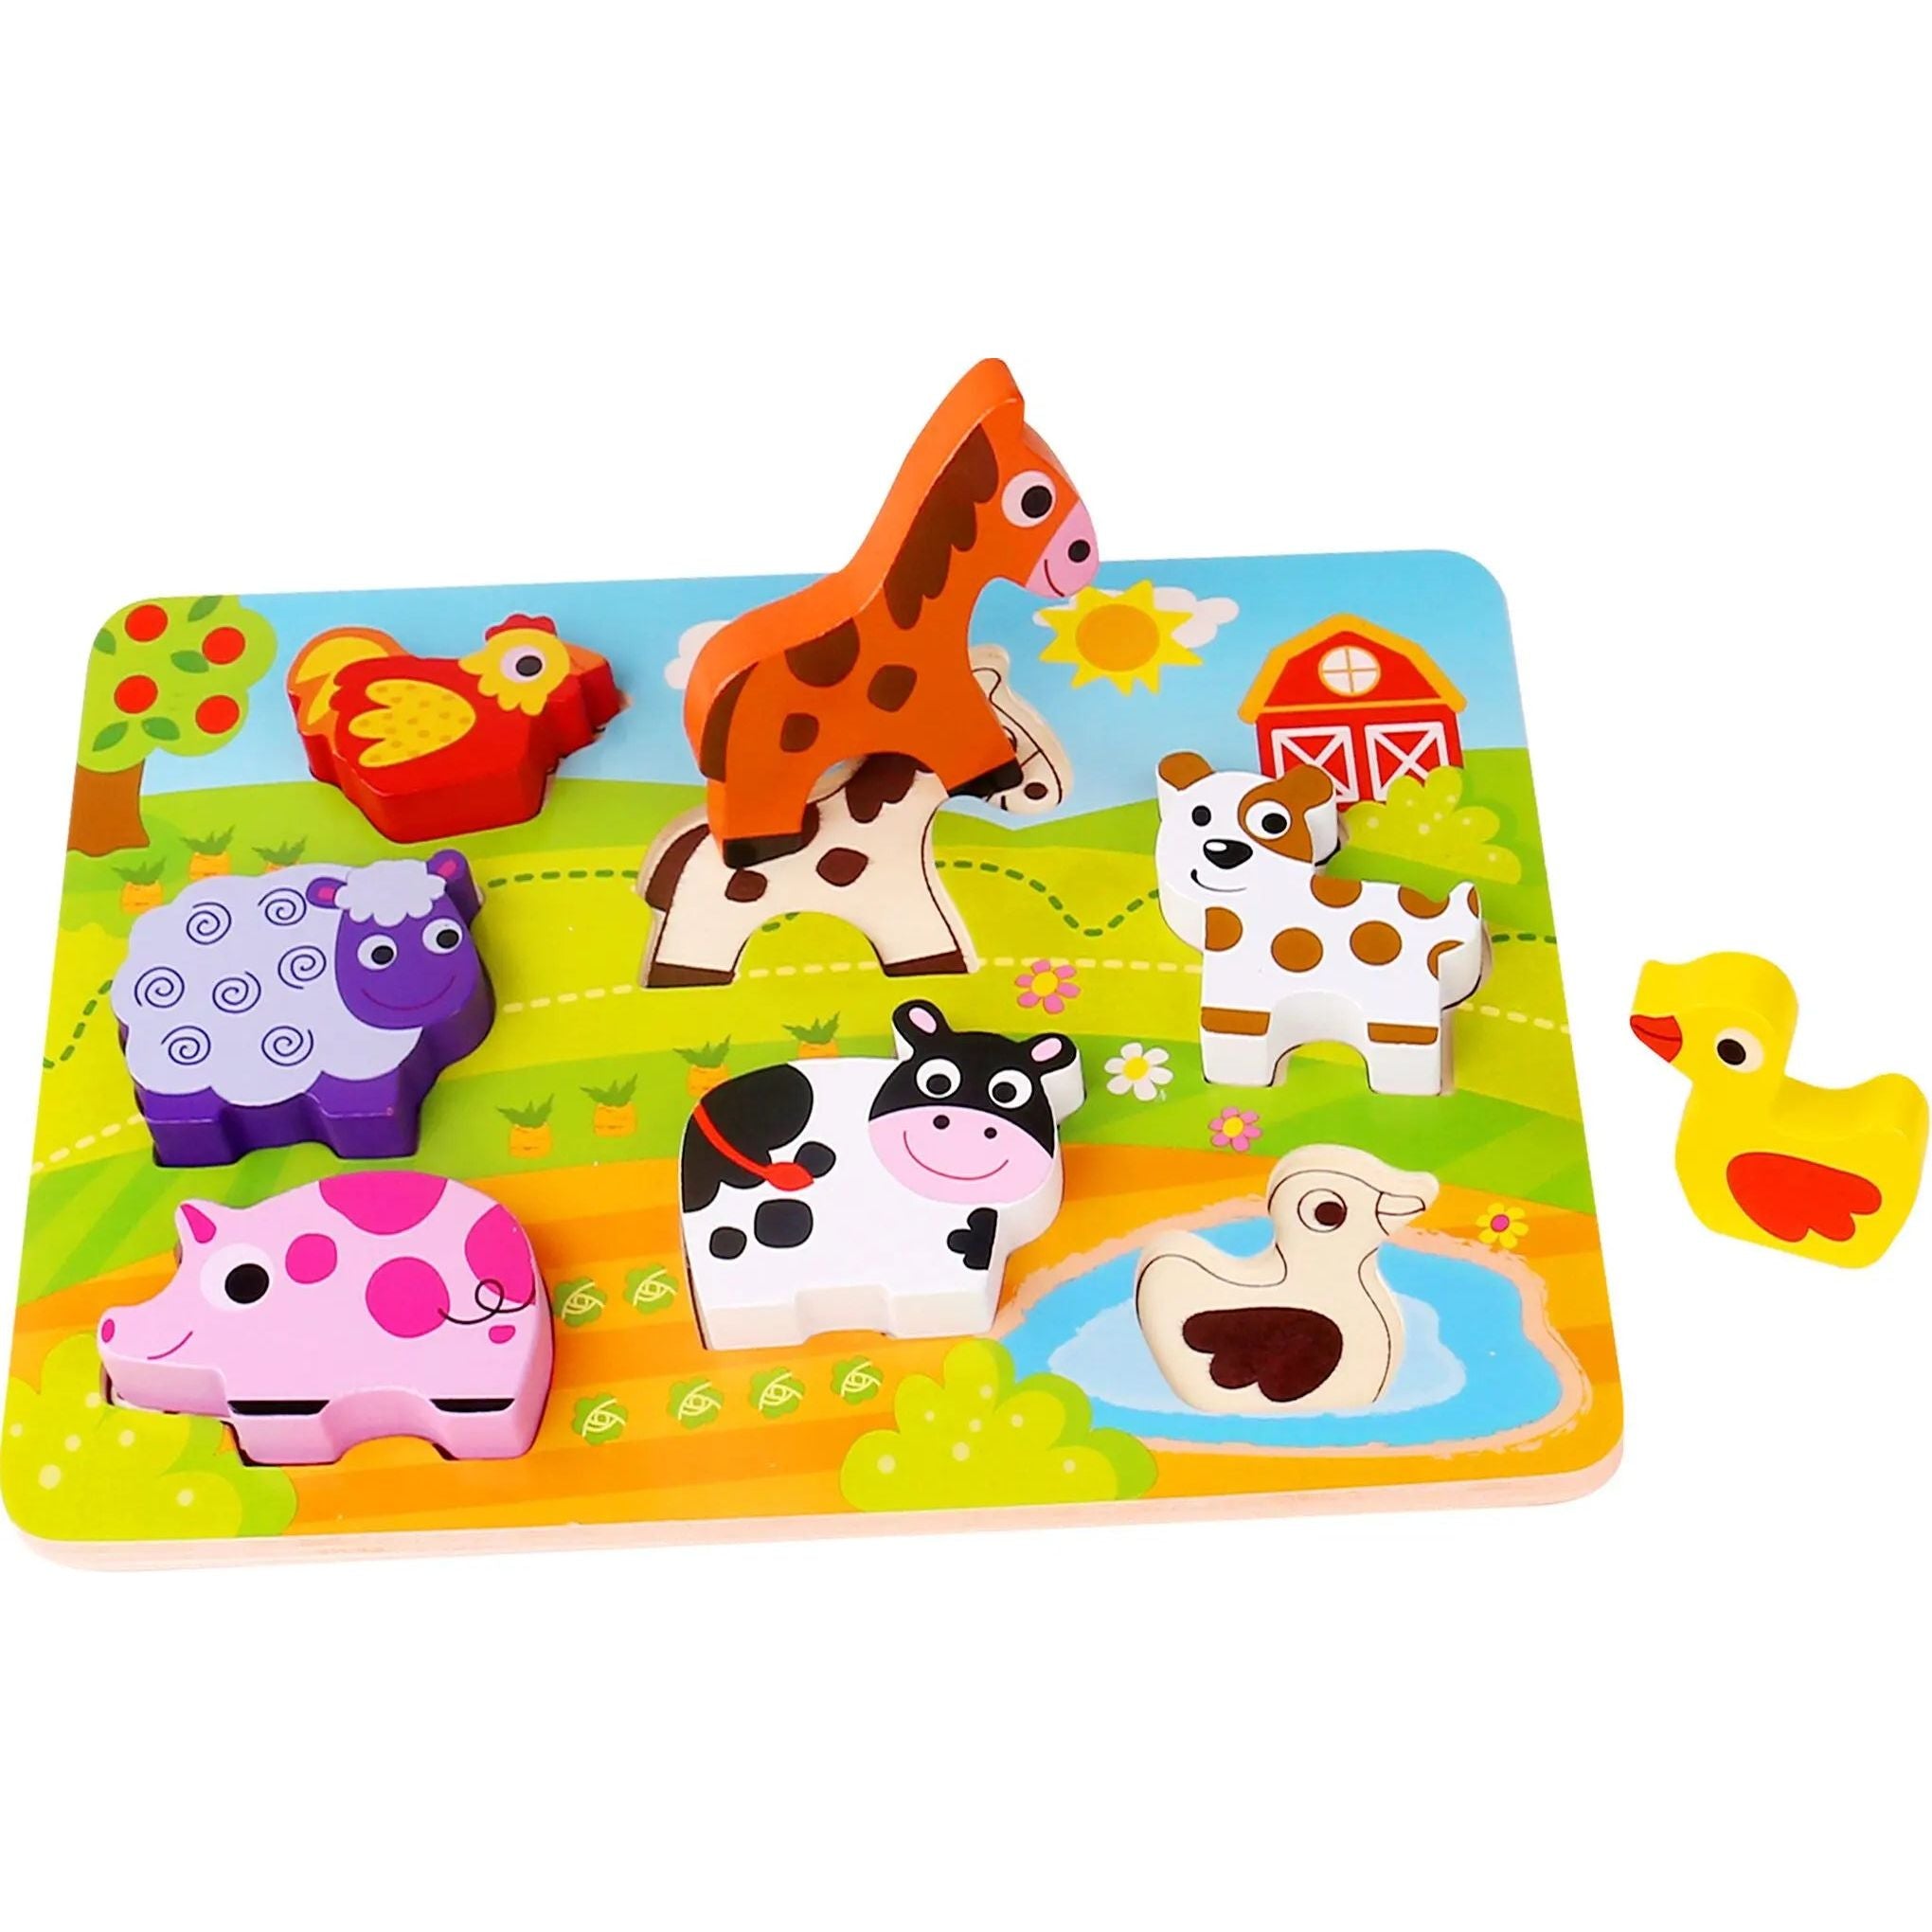 Tooky Toy Wooden 8 Piece Chunky Farm Puzzle Tooky Toy